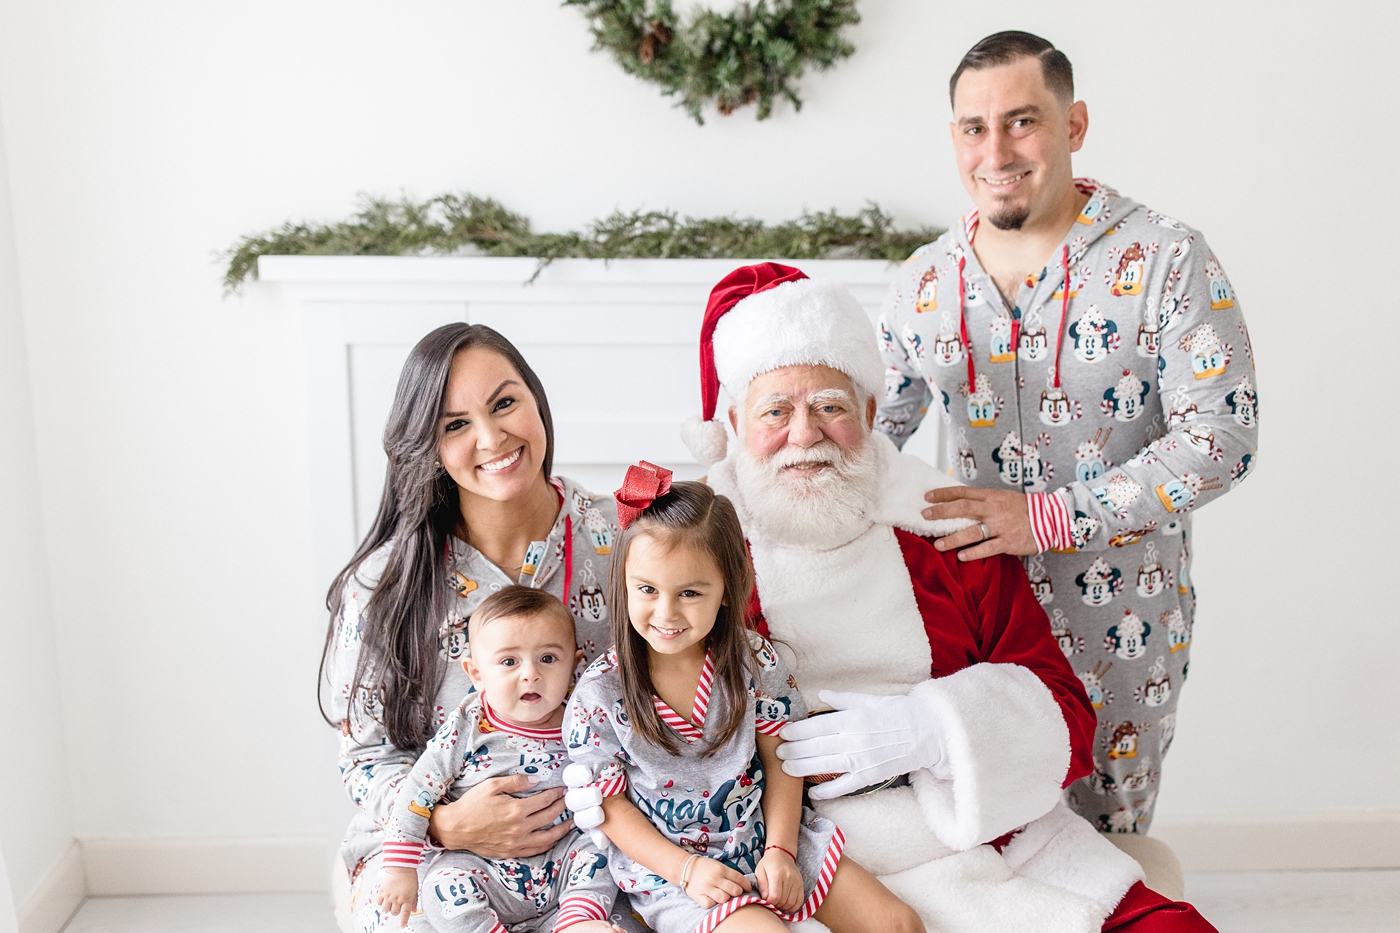 Family of four in matching pajamas with Santa Claus studio miami session. Photo by Ivanna Vidal Photography.